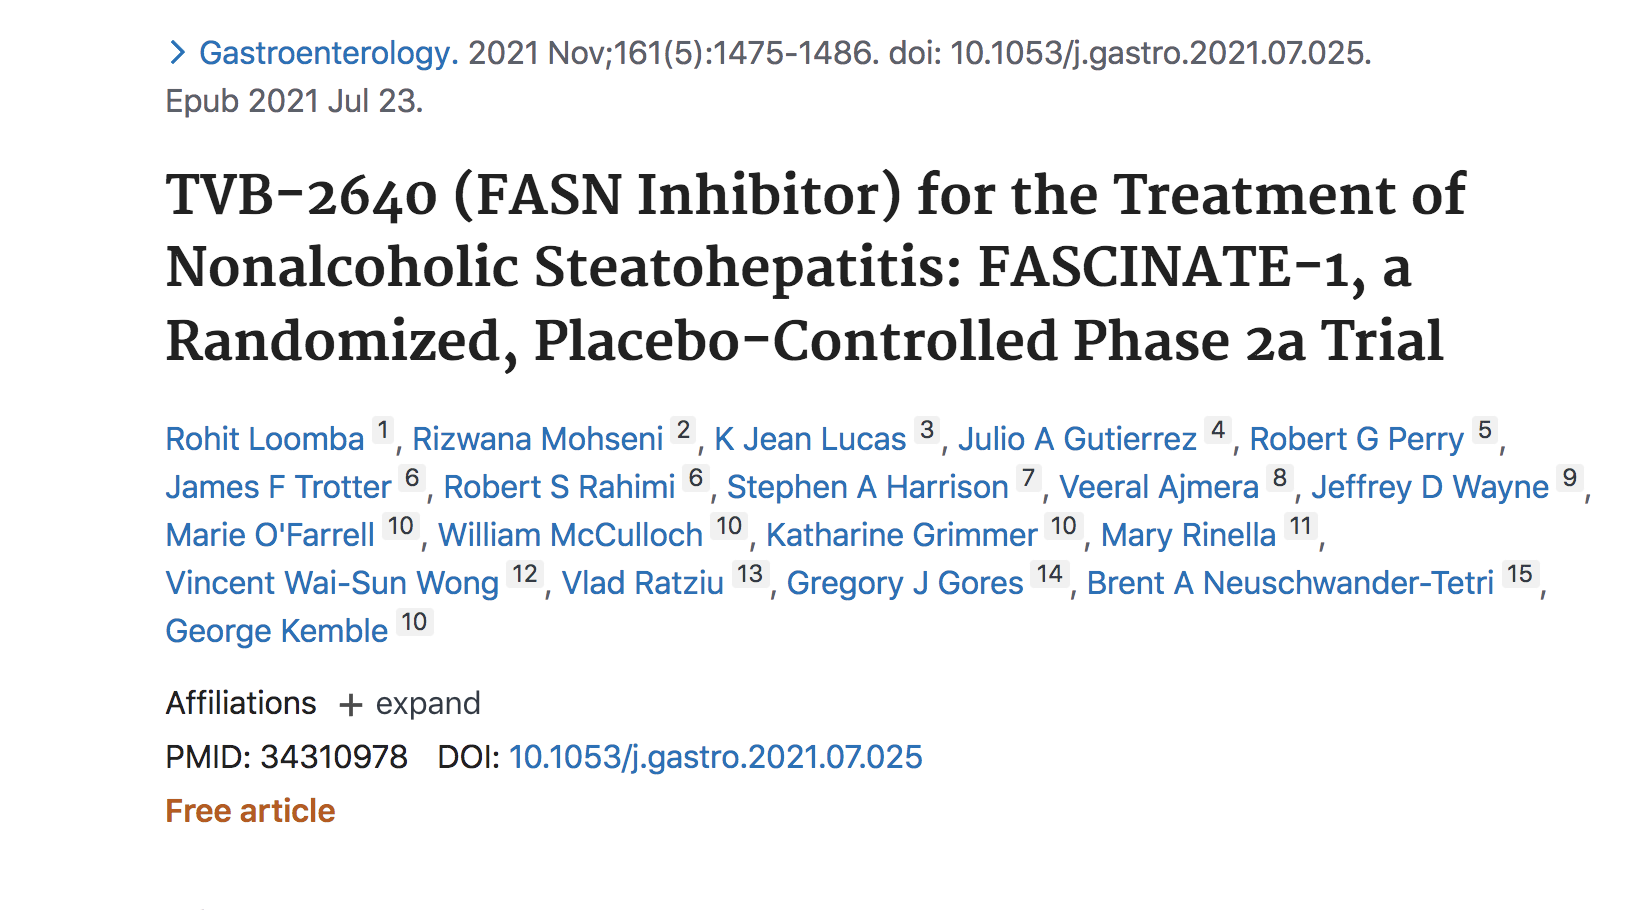 TVB-2640 (FASN inhibitor) for the treatment of nonalcoholic steatohepatitis: FASCINATE-1, a randomized, placebo-controlled Ph2a trial. thumbnail